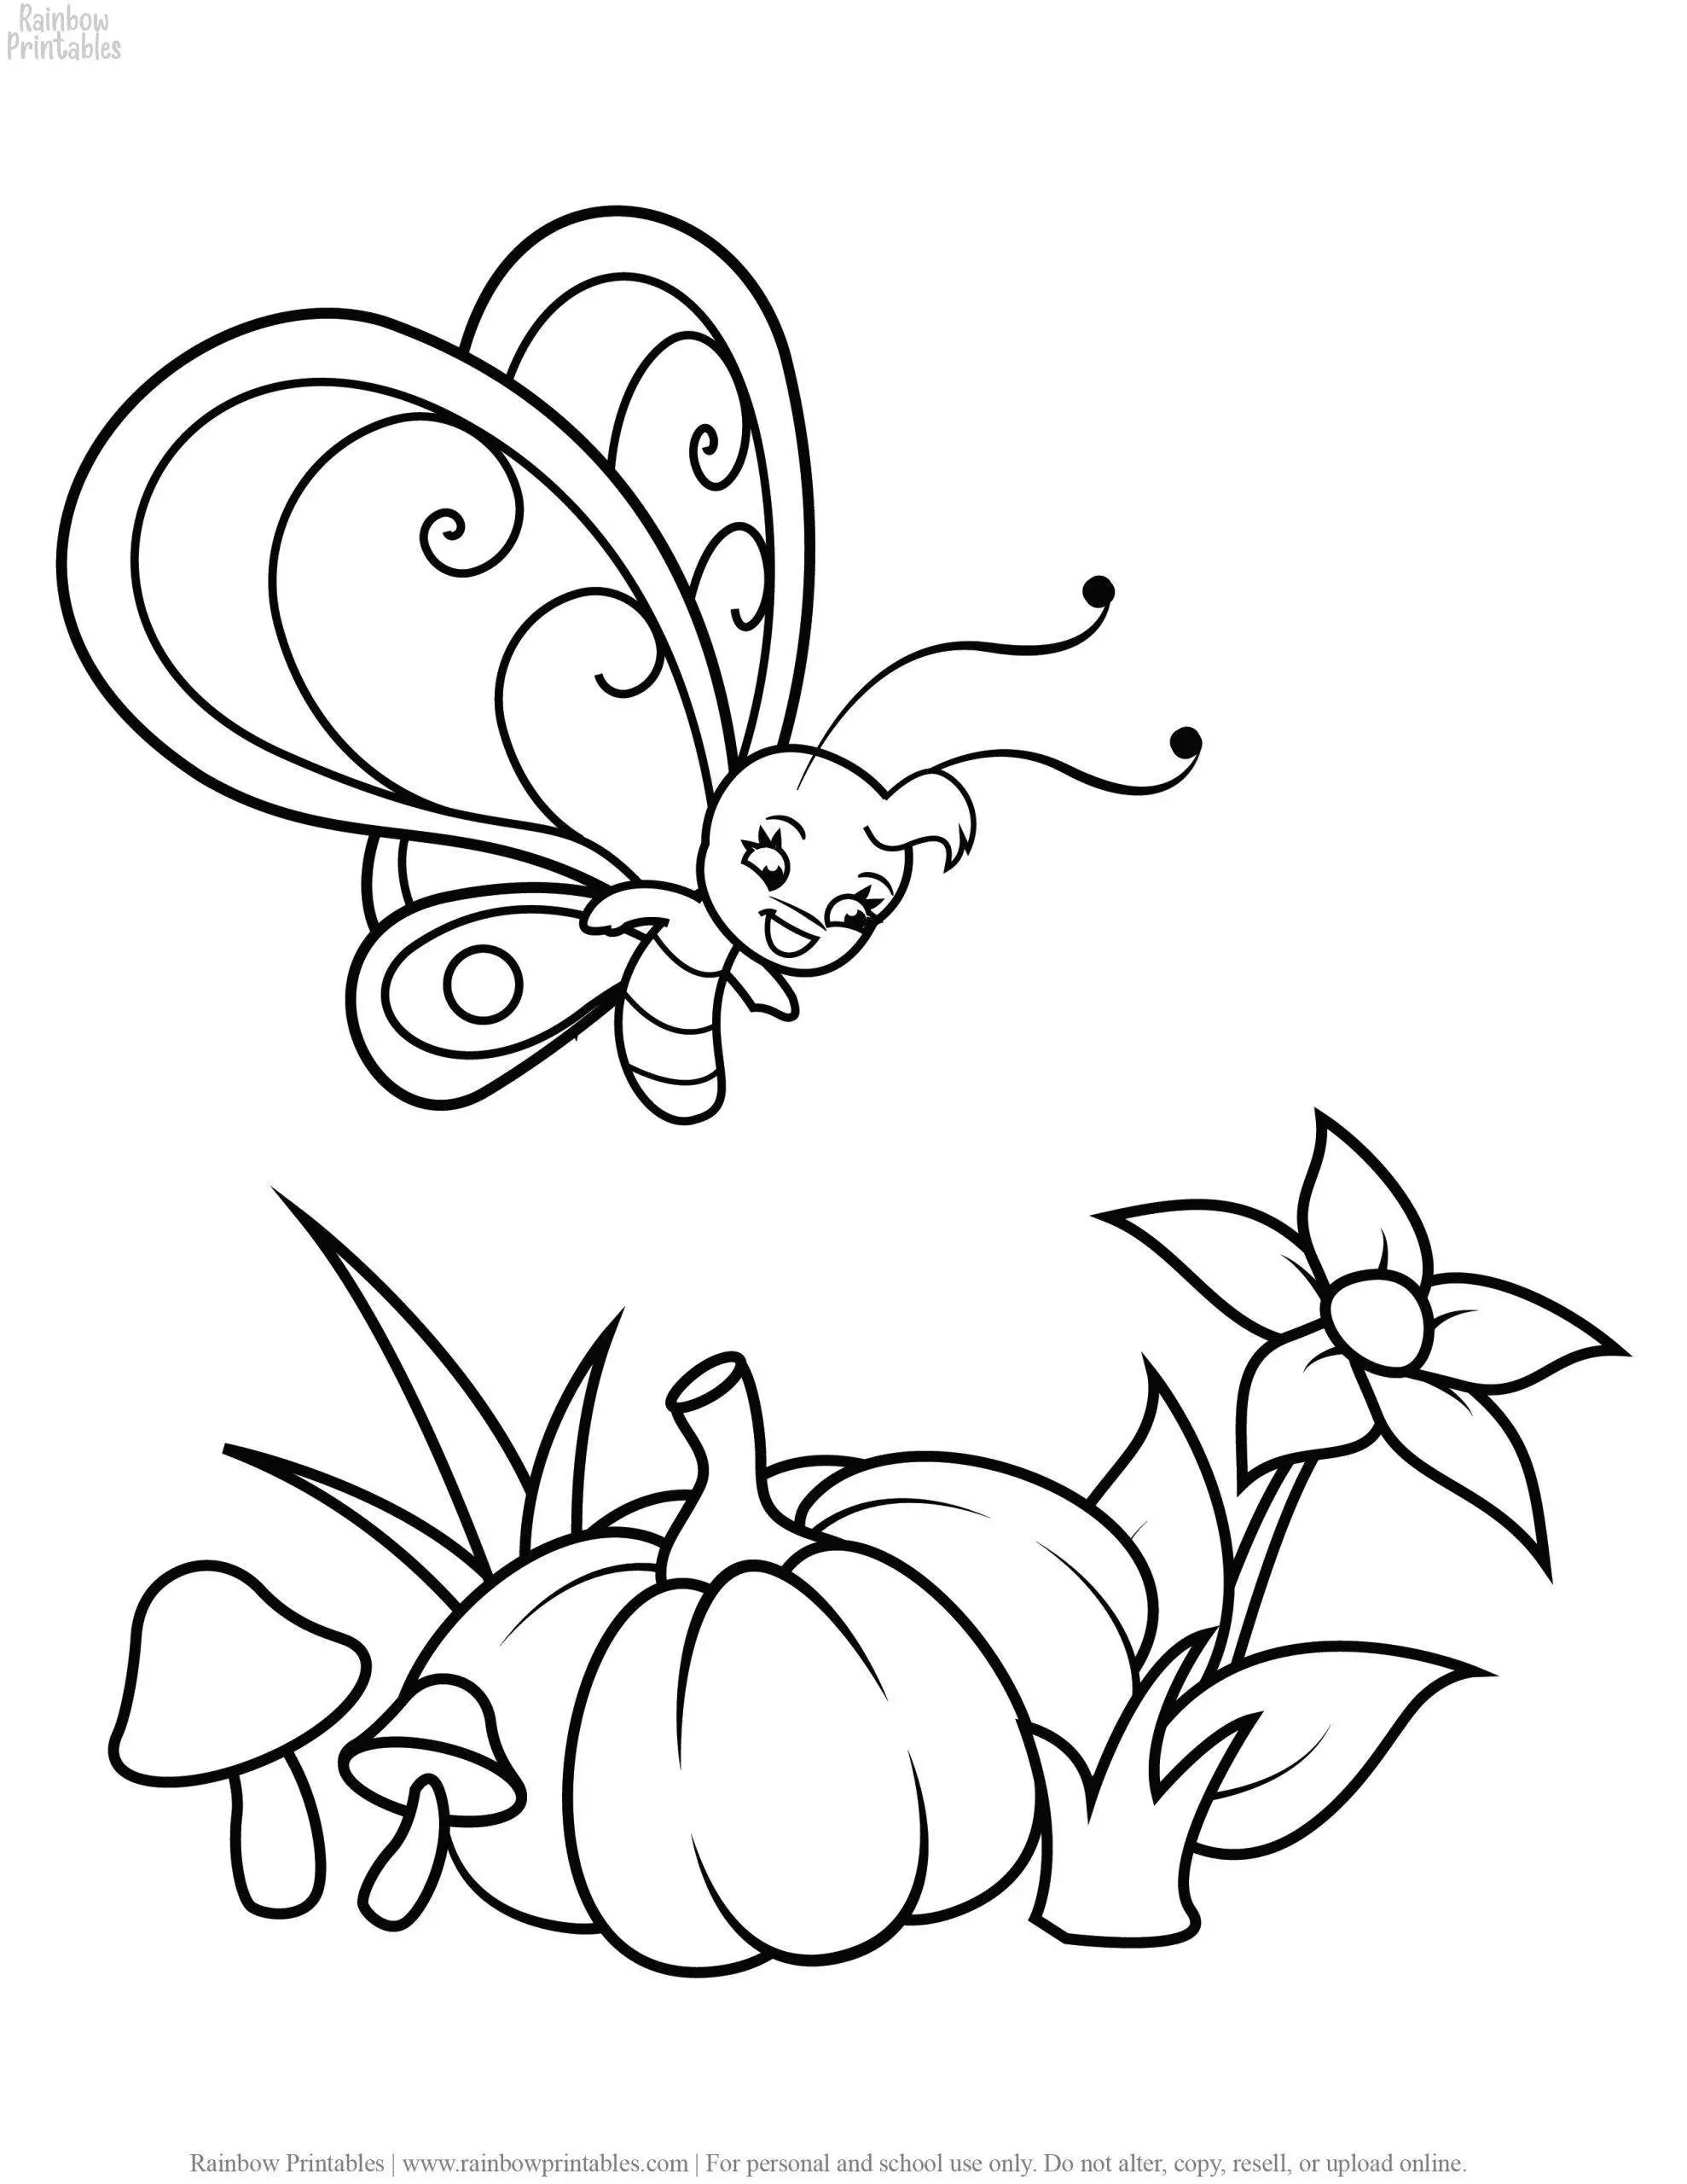 Easy Spring Time FLOWER and Butterfly Animal Insect Coloring Pages for Kids Printable Art Activity for Children